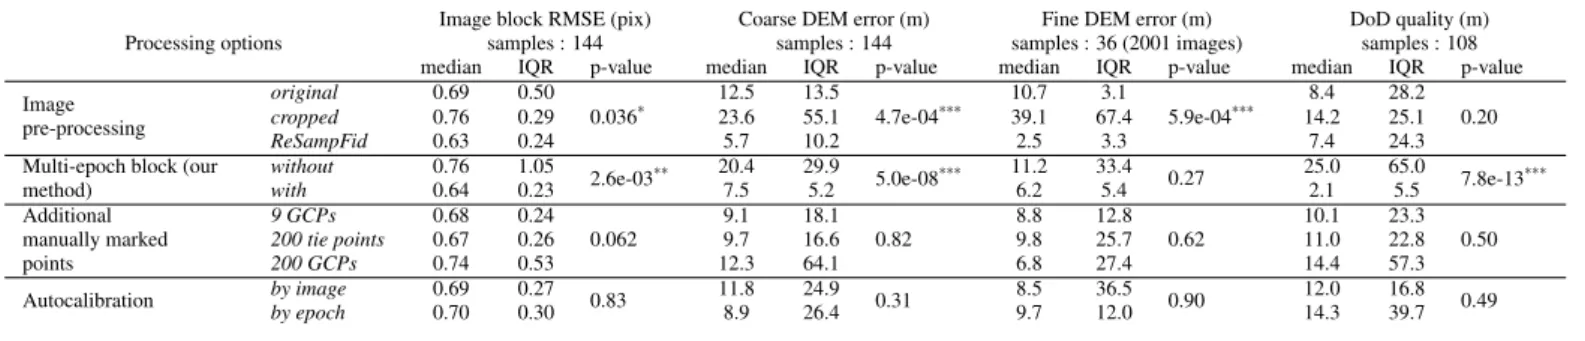 Table 4: Effects of the processing options on the image block quality, DEM quality and DoD quality